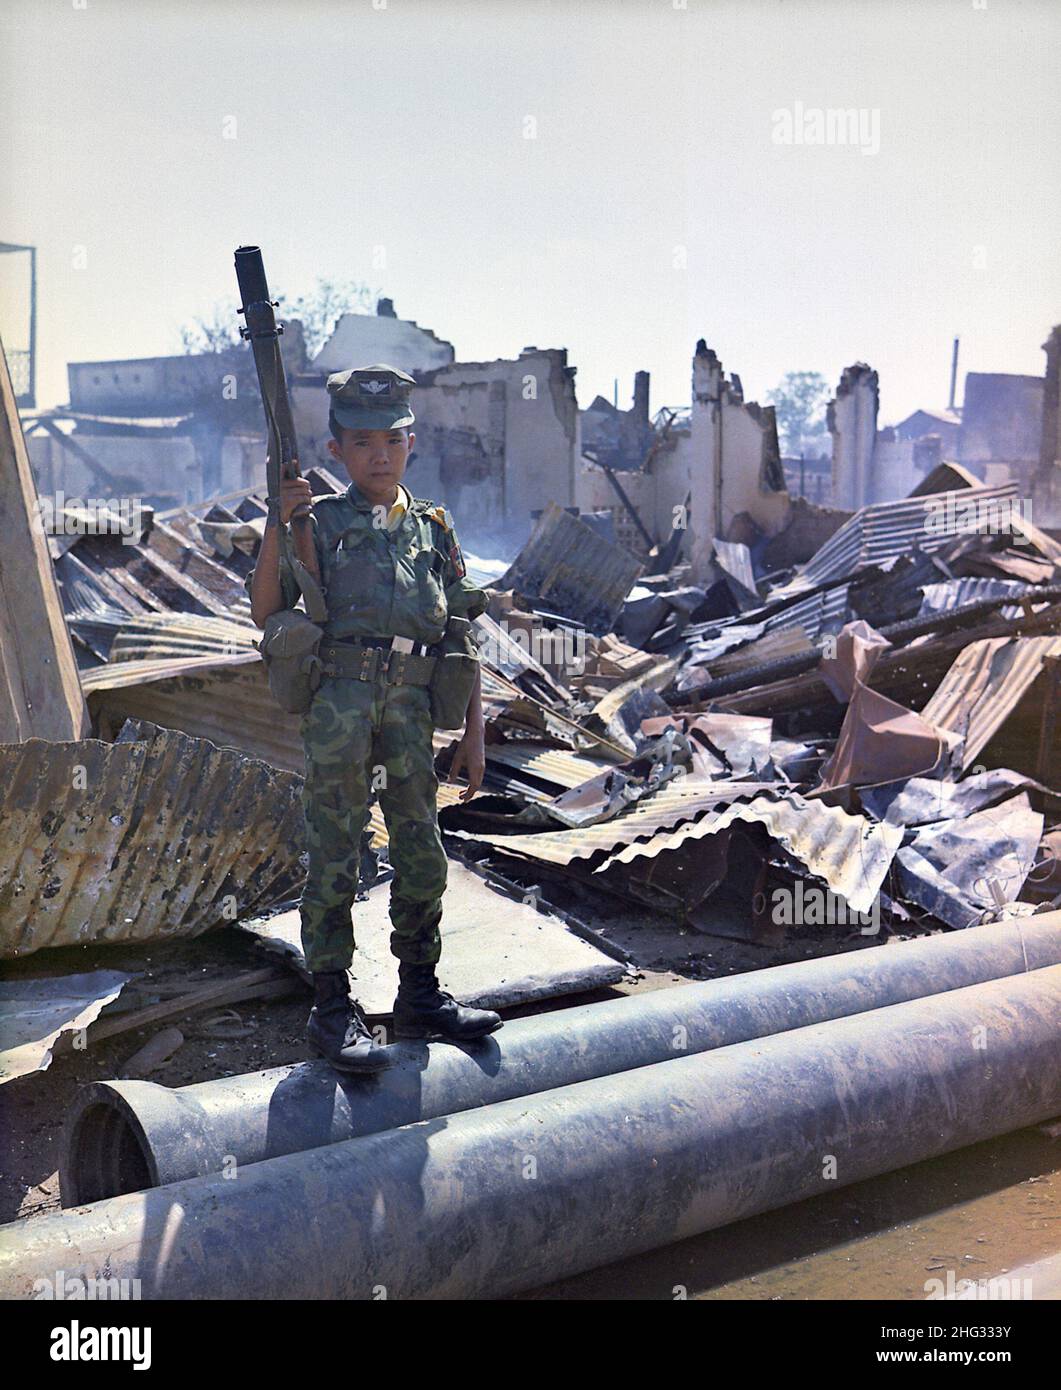 A Vietnamese child soldier in 1968. This twelve year old ARVN Airborne trooper with M-79 grenade launcher accompanied the Airborne Task Force Unit on a sweep through the devastated area surrounding the French National Cemetery on Plantation Road after a day long battle there. The young soldier has been 'adopted' by the Airborne Division. Stock Photo